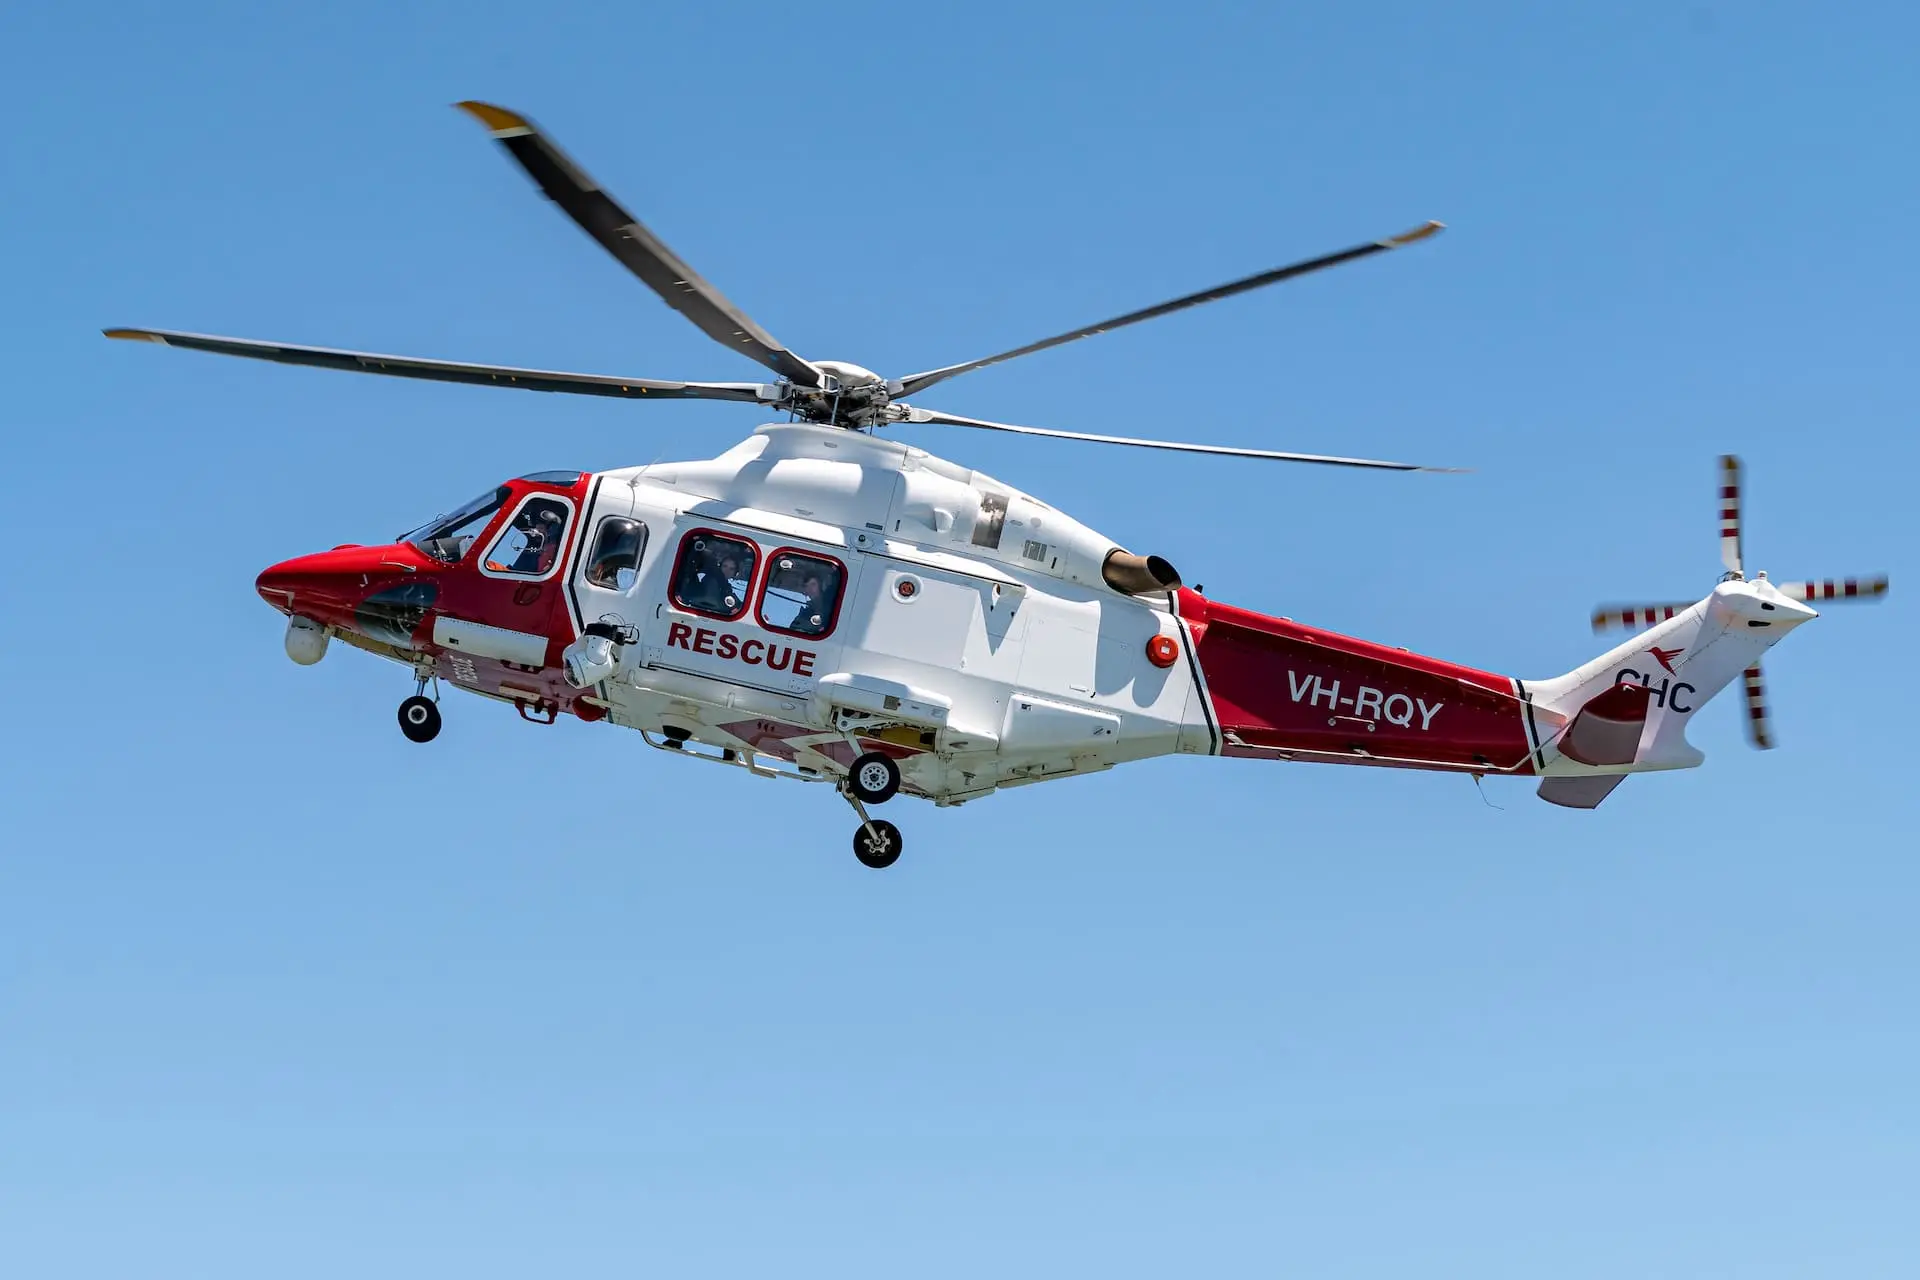 This Australian 2008 AGUSTA S.P.A. AW 139 used by the Royal Australian Air Force (RAAF) is likely kept mission-ready with spare parts supplied by AVPRO.